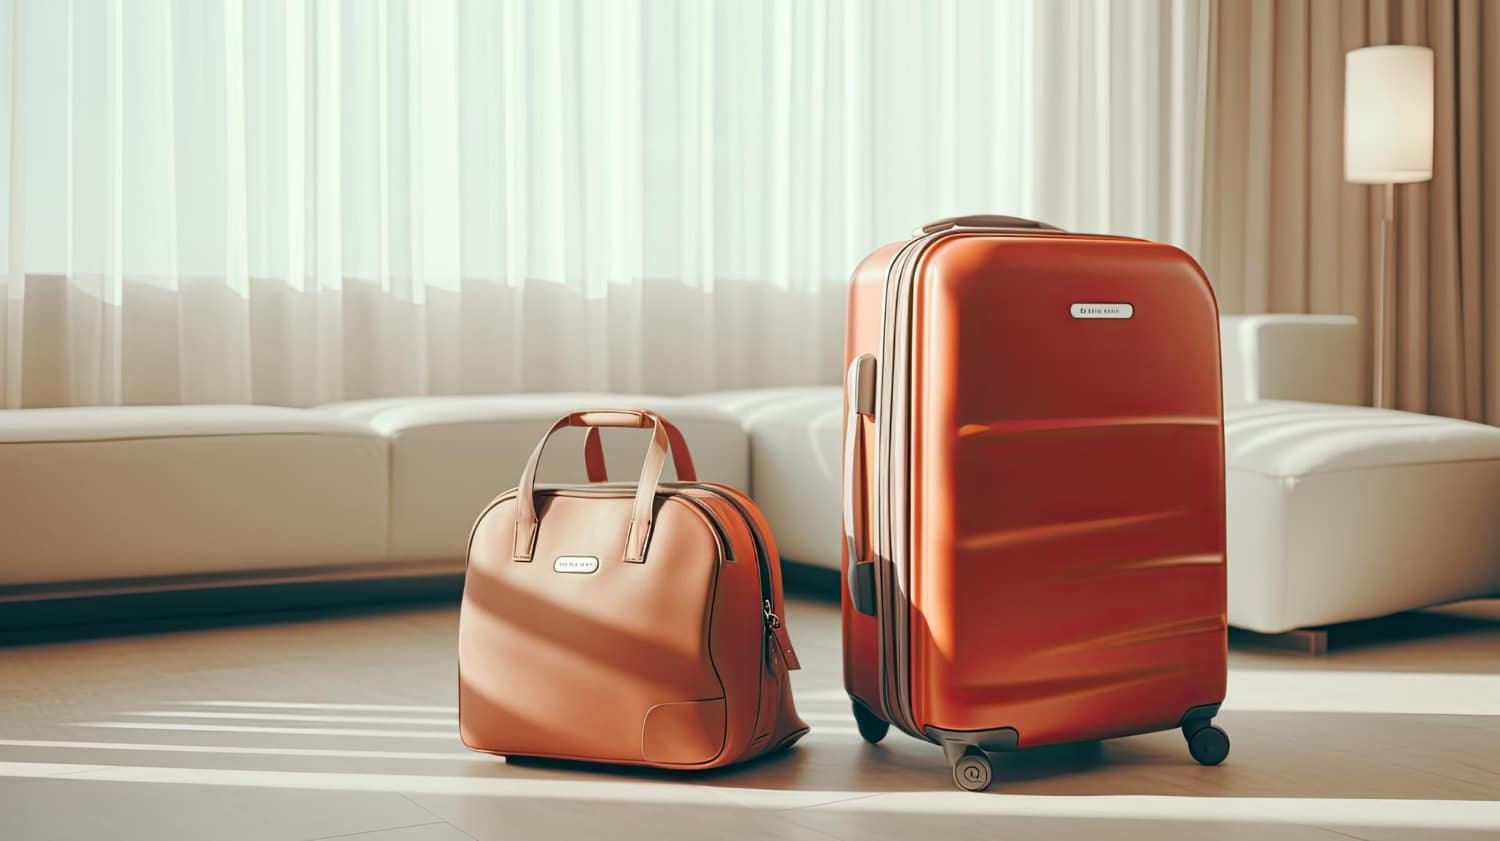 You are currently viewing Lo & Sons: Smart, Stylish Travel Bags for the Modern Traveler